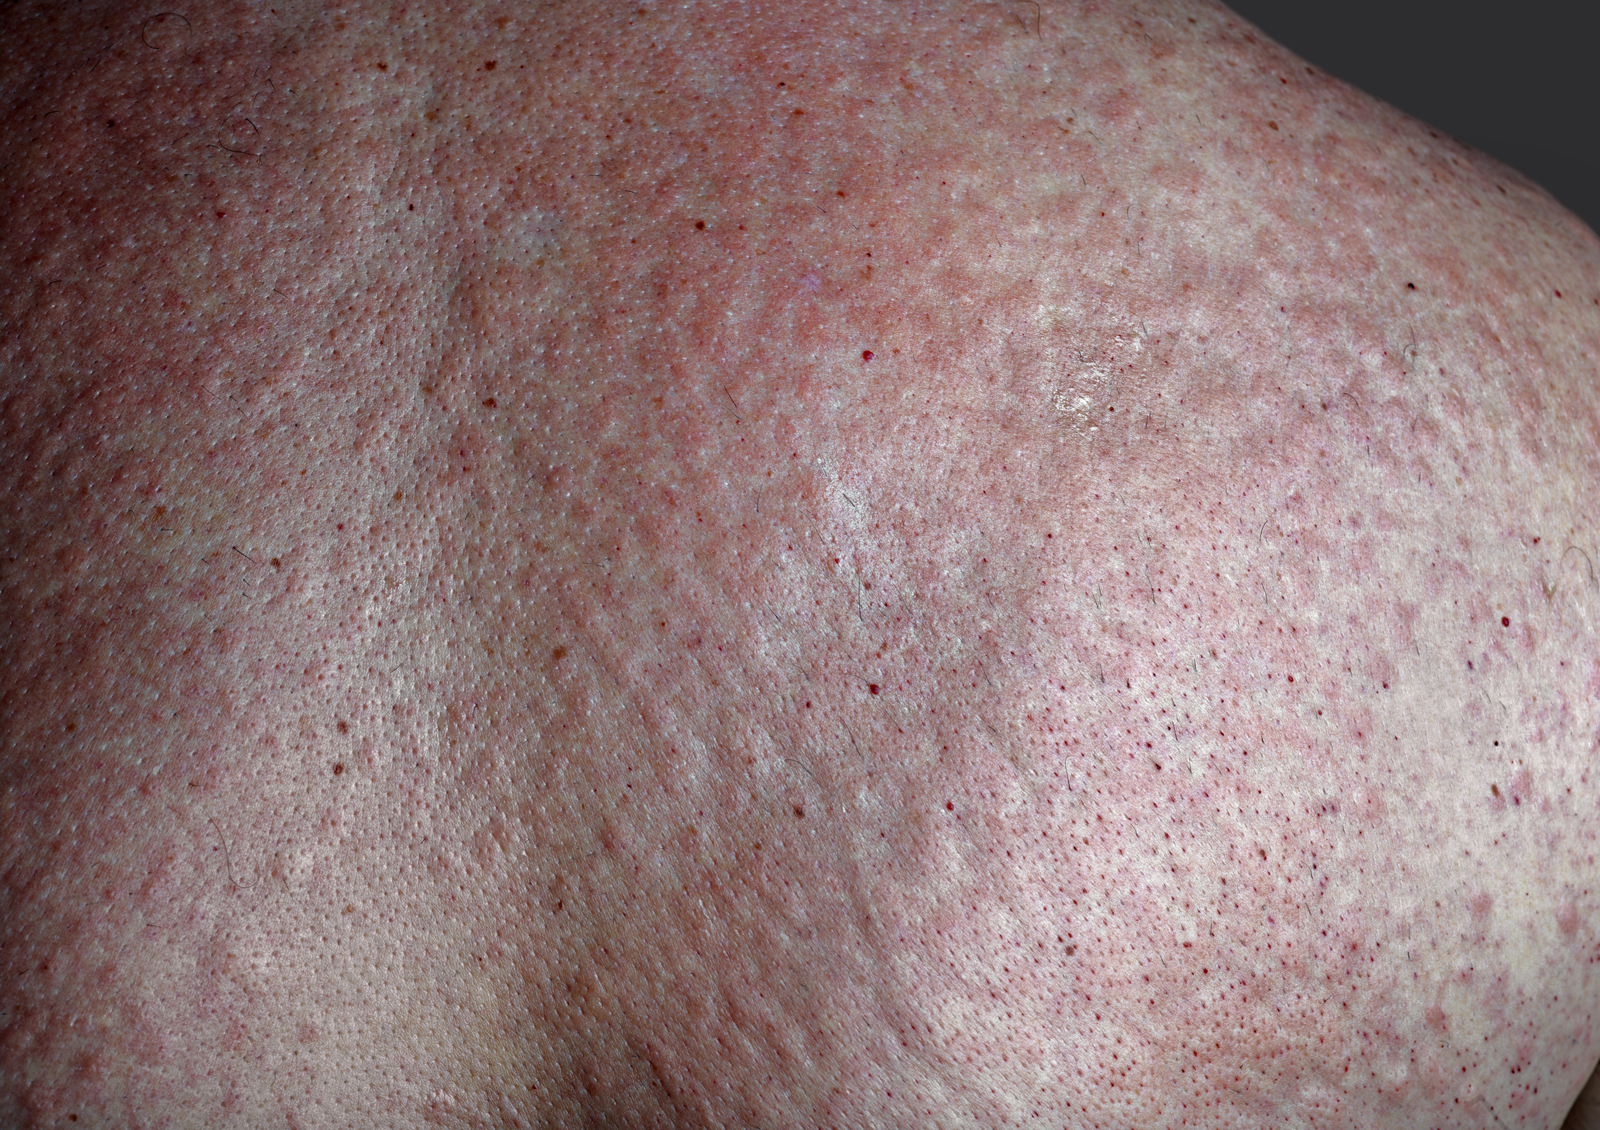 Rash on the back of a male after waxing